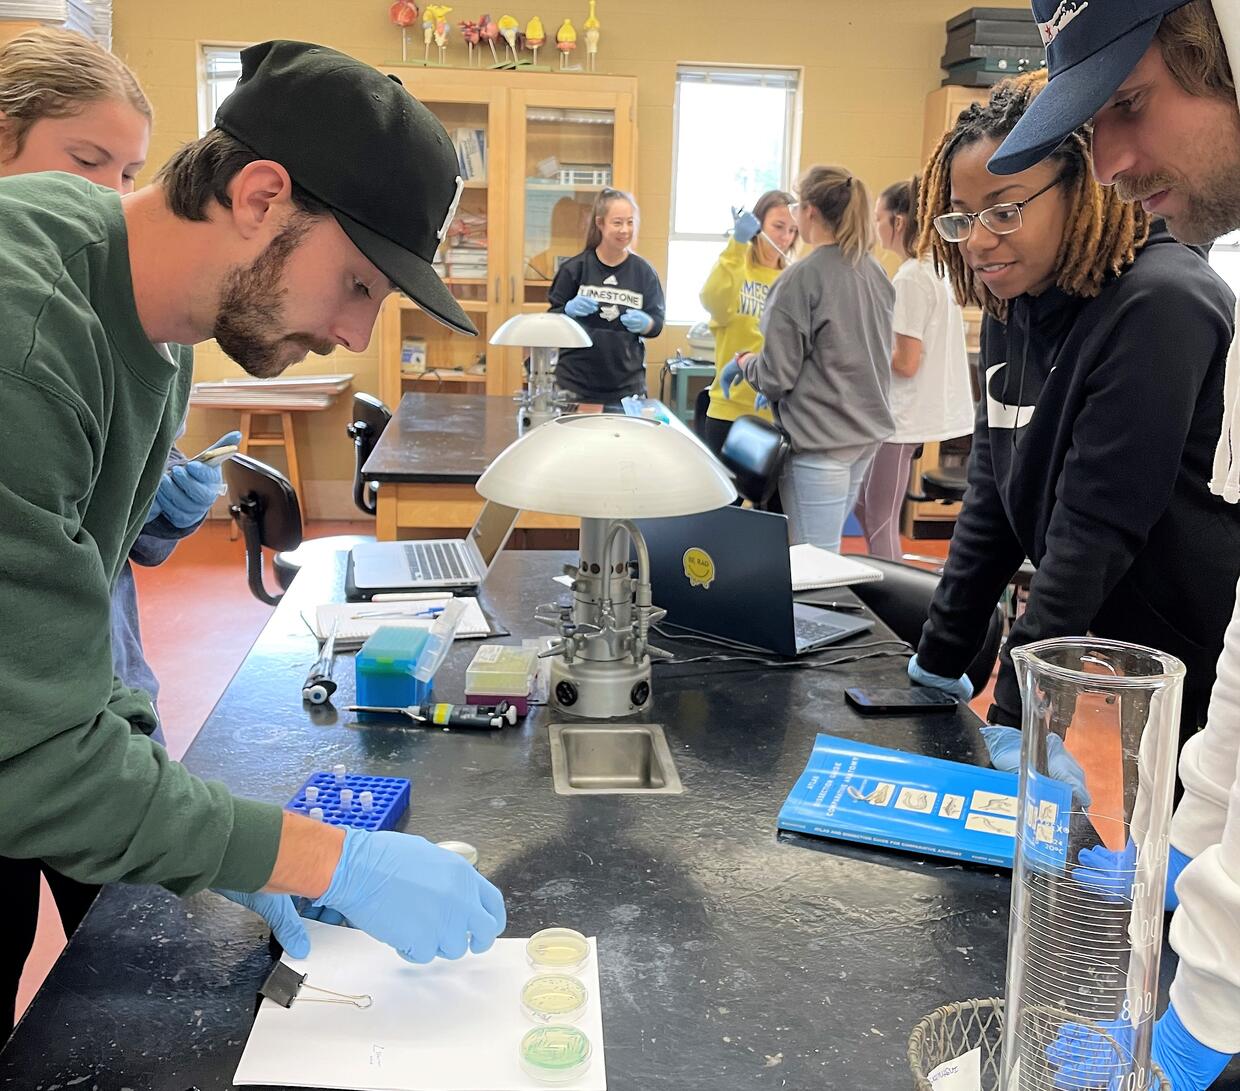 Limestone University students in a Molecular Cell Biology course have successfully performed the first CRISPR-Cas9 gene editing experiment as part of a teaching laboratory exercise on campus.